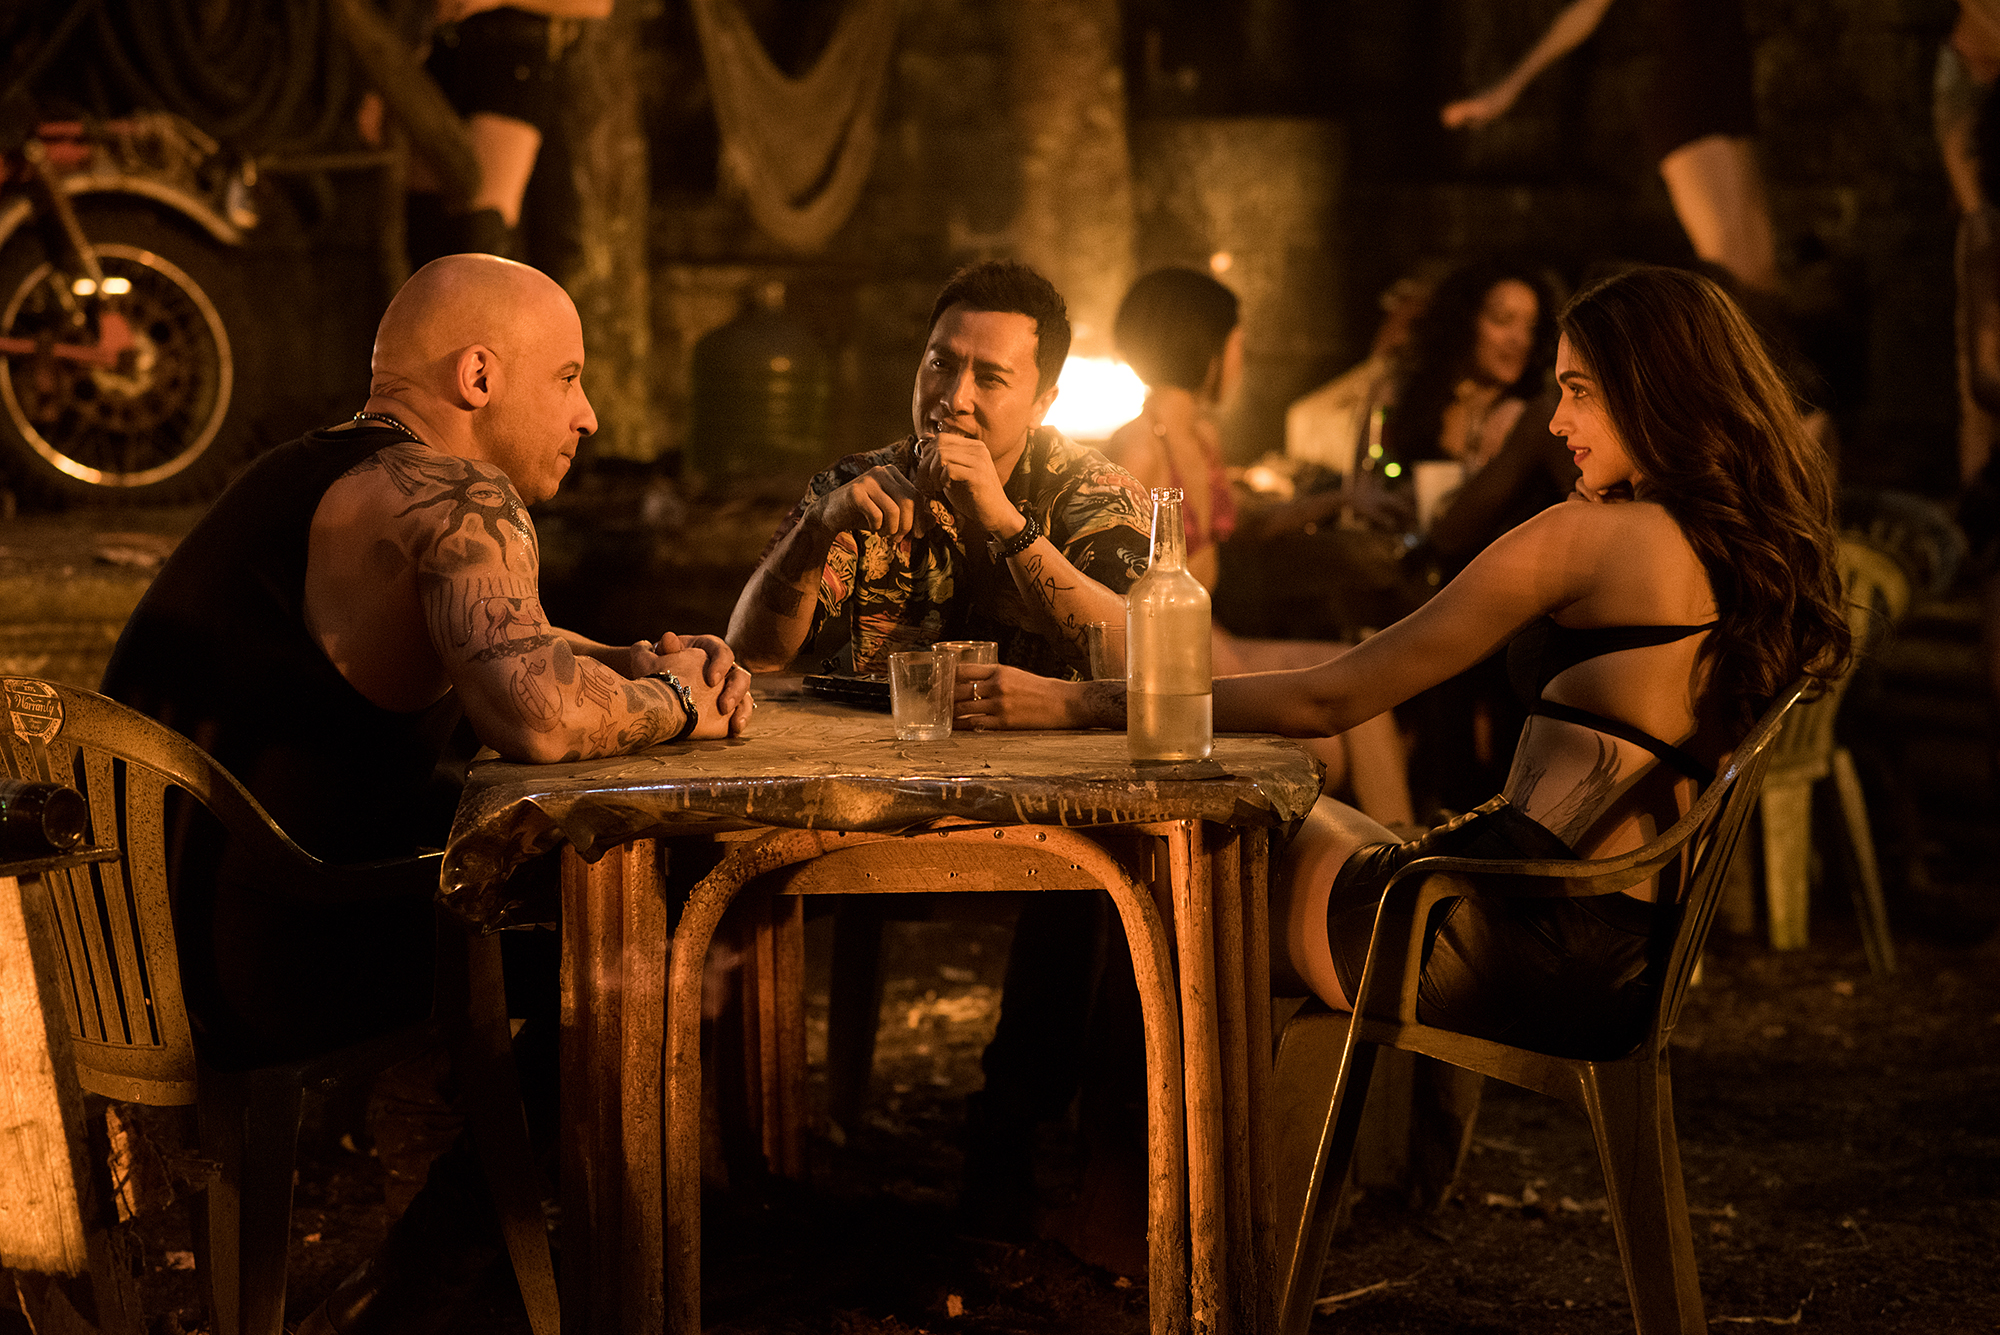 (L-R) Vin Diesel as Xander Cage, Donnie Yen as Xiang and Deepika Padukone as Serena Unger in xXx: RETURN OF XANDER CAGE by Paramount Pictures and Revolution Studios